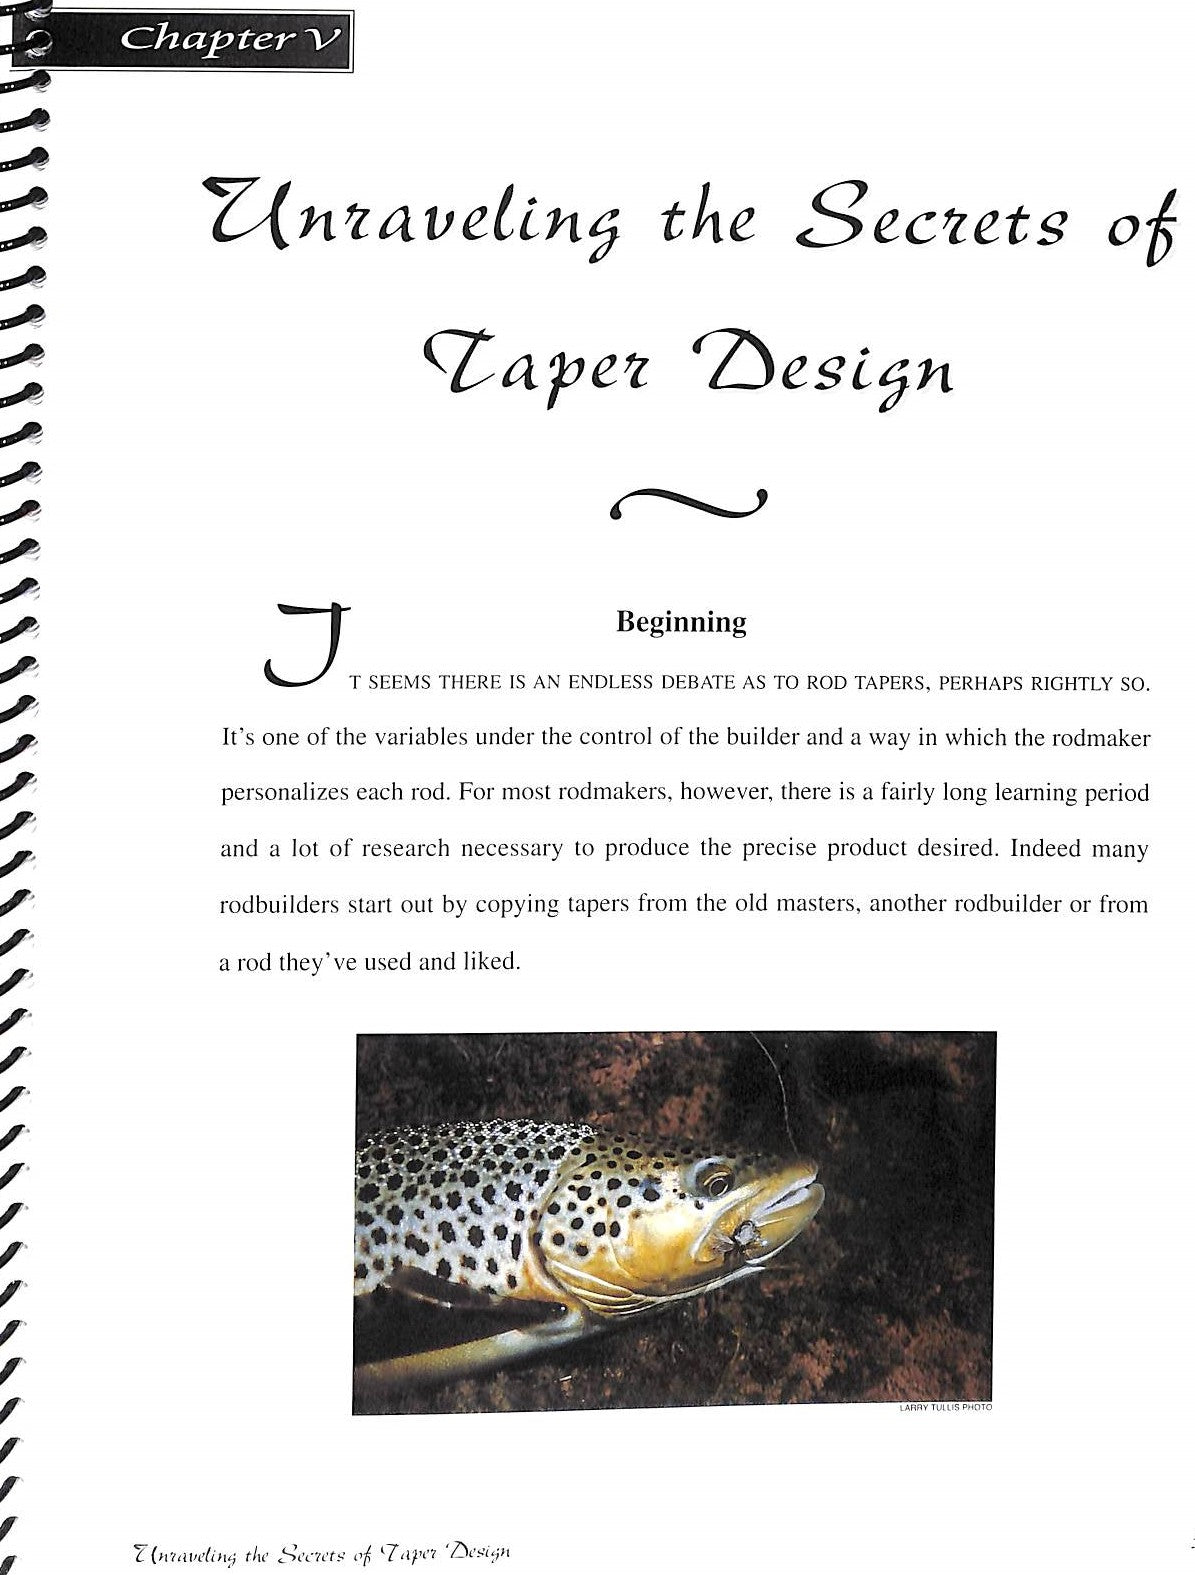 Constructing Cane Rods: Secrets Of The Bamboo Fly Rod 1998 GOULD, Ra